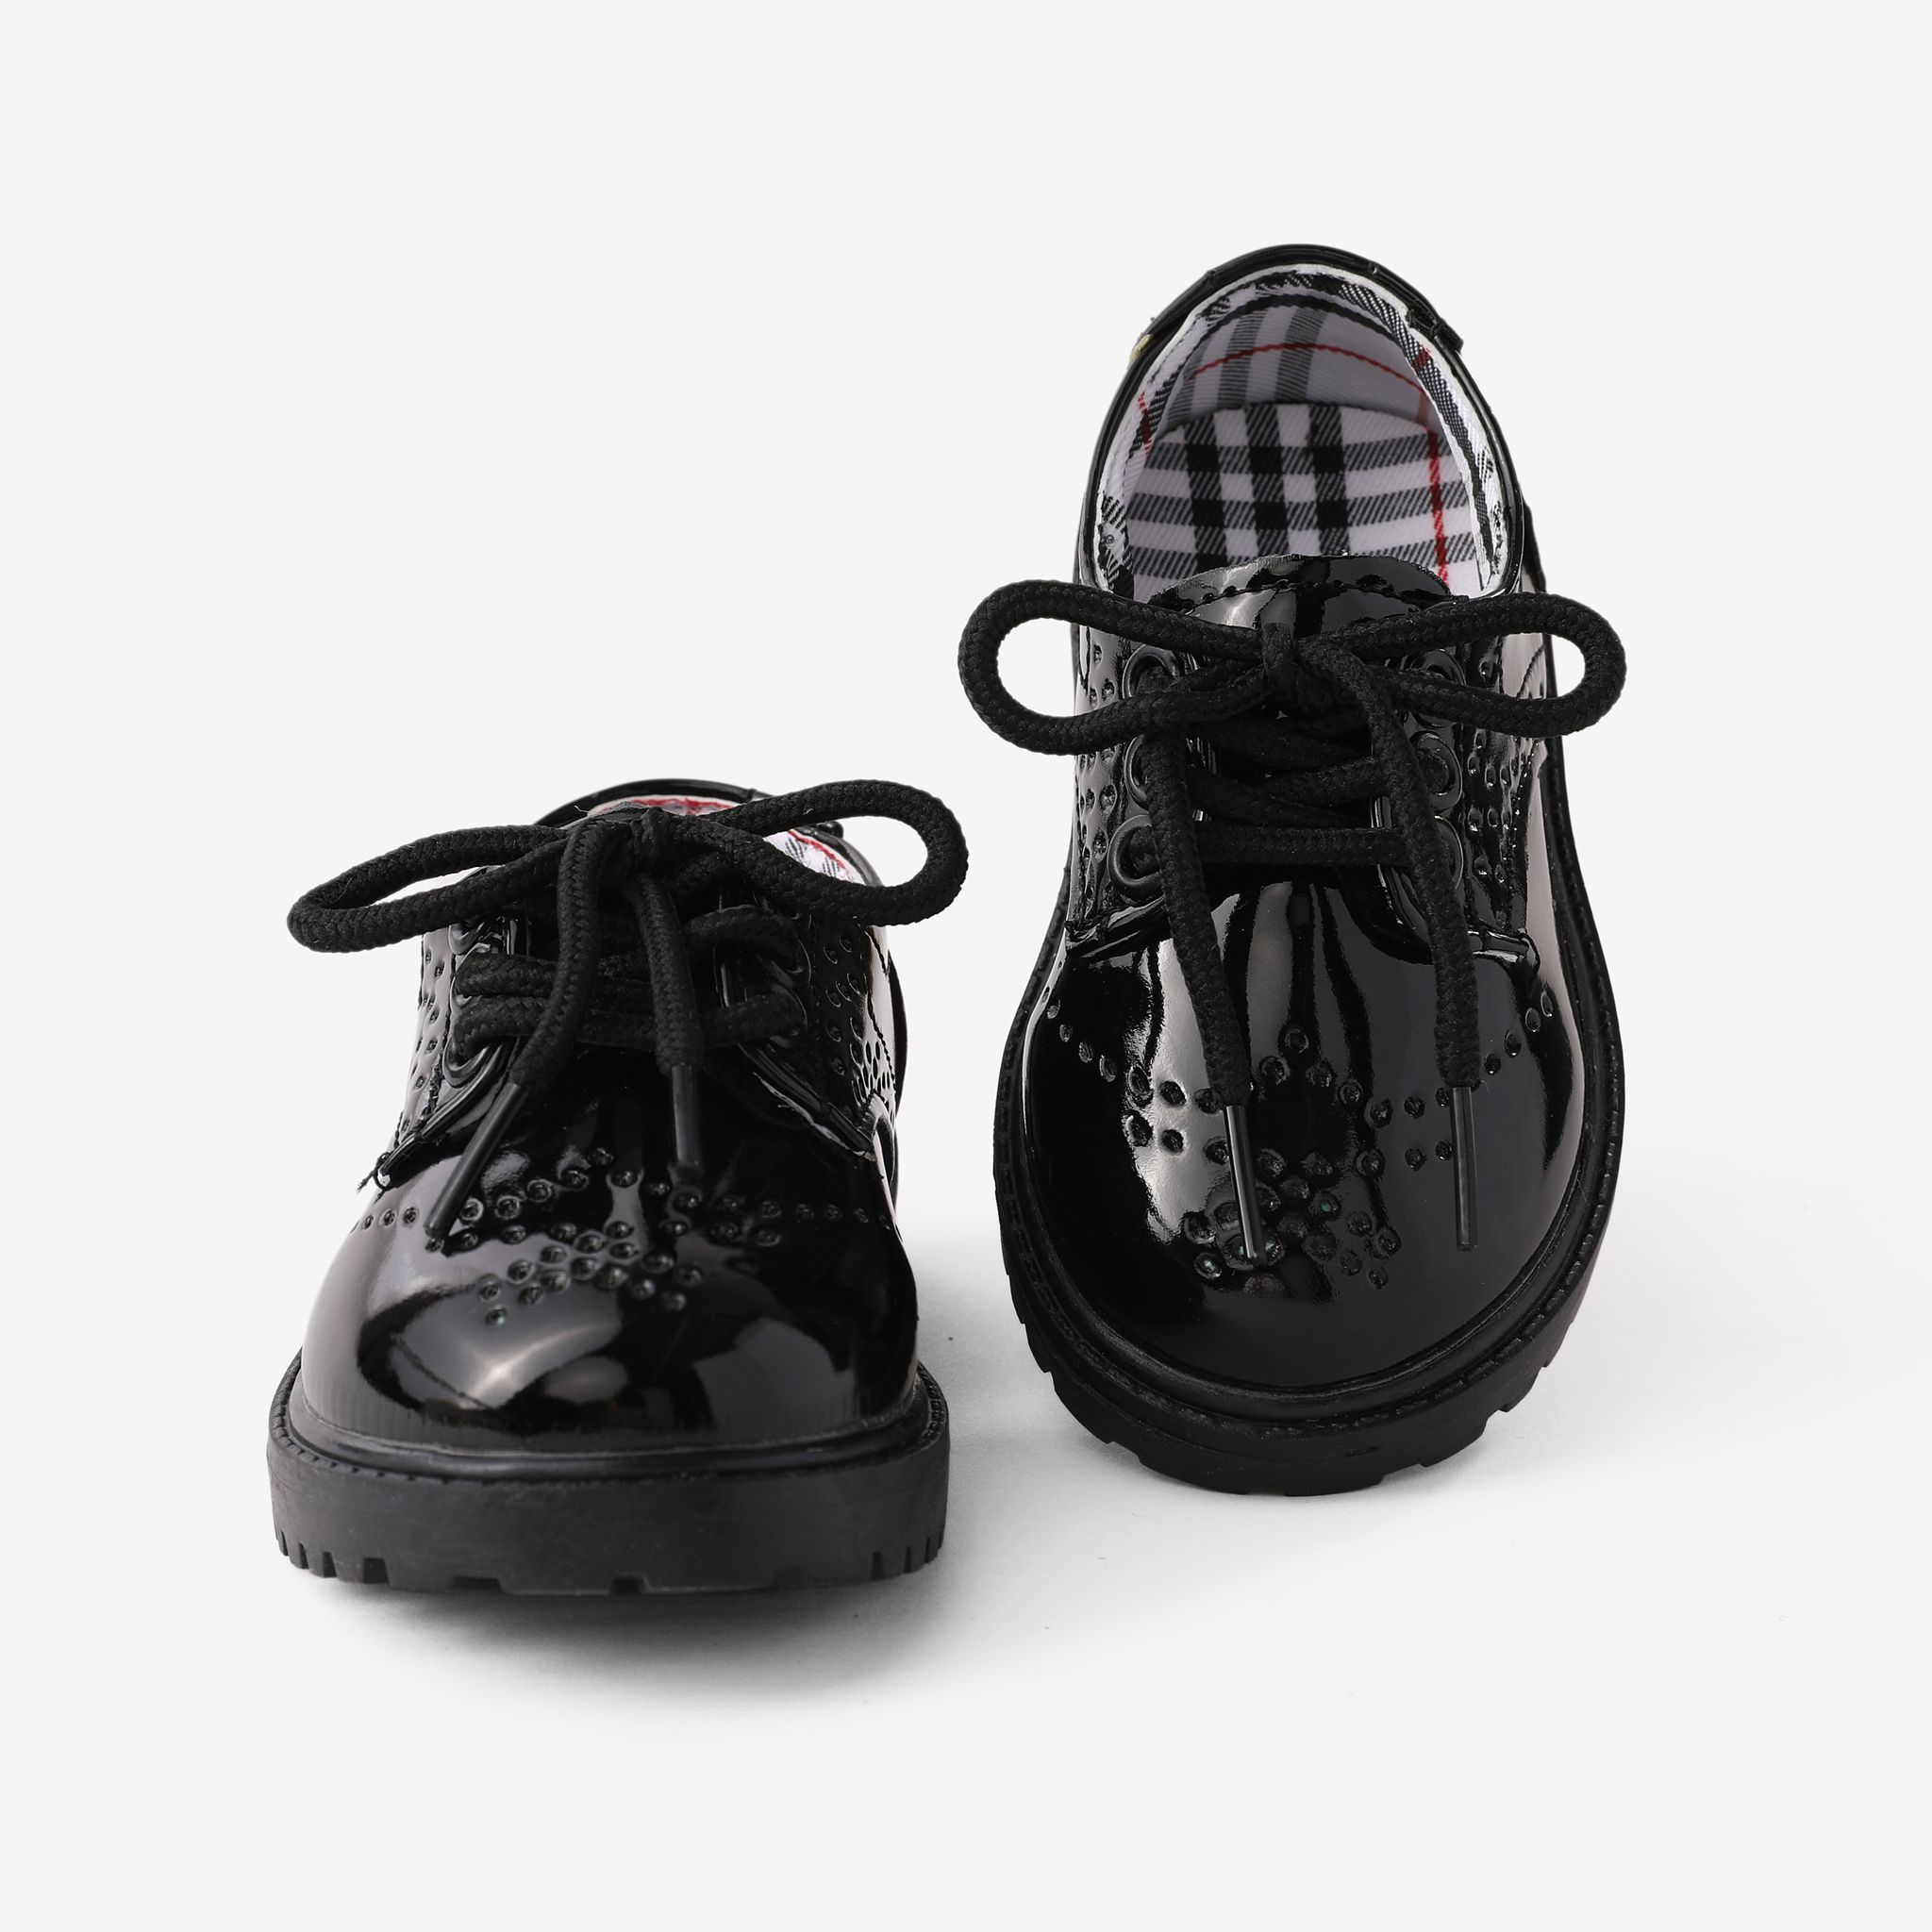 Toddler & Kids Classic British Style Lace-up Leather Shoes